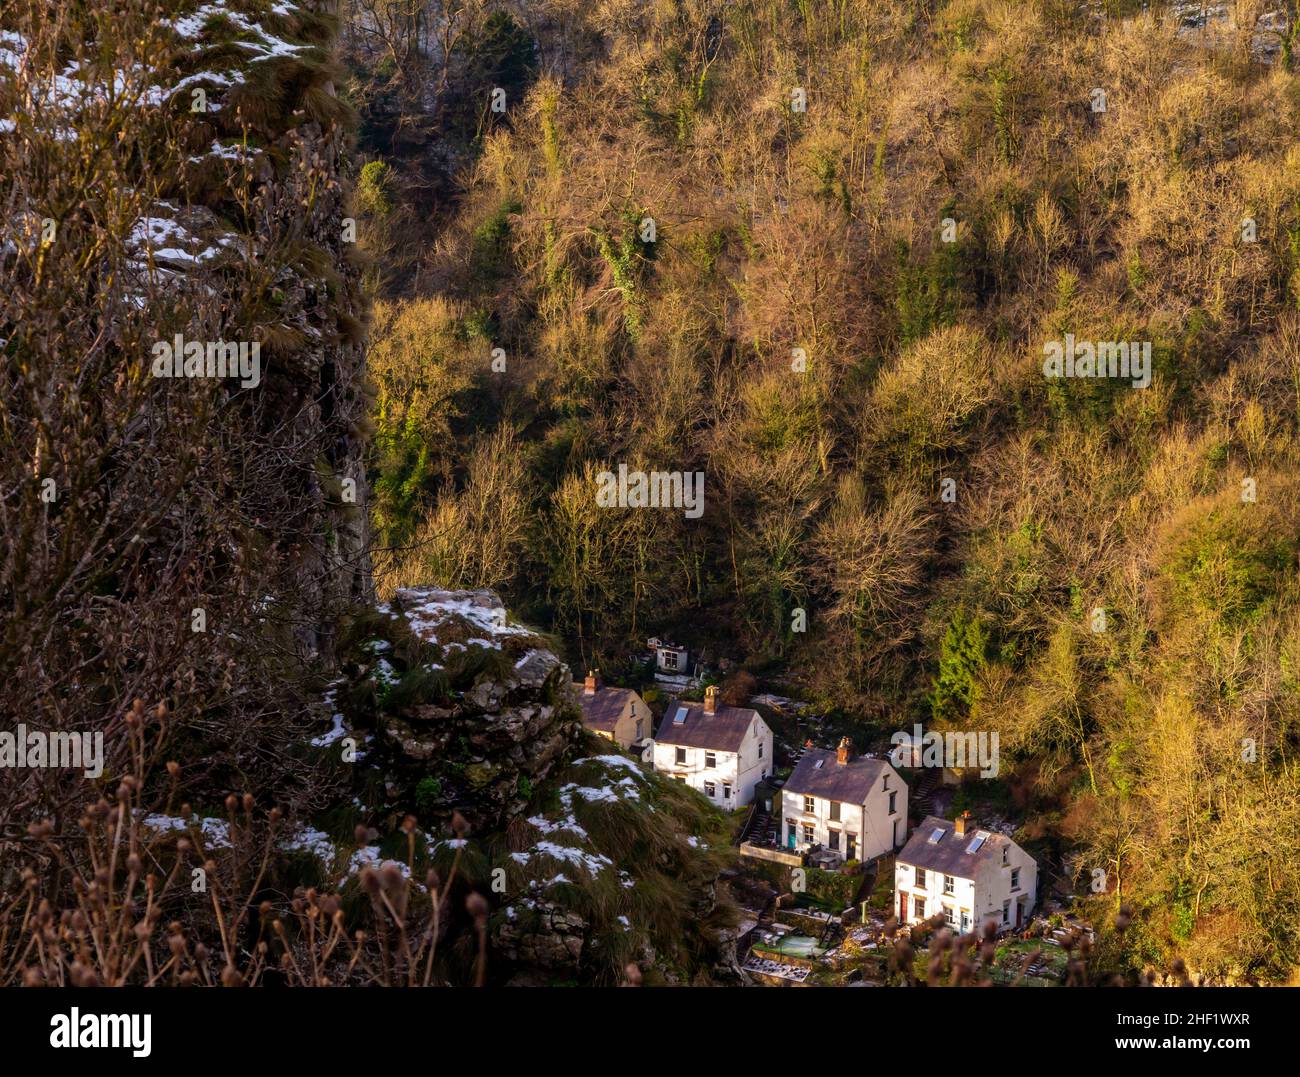 Snow covered landscape with trees at High Tor in Matlock Bath in the Derbyshire Peak District England UK with houses visible in the distance below. Stock Photo